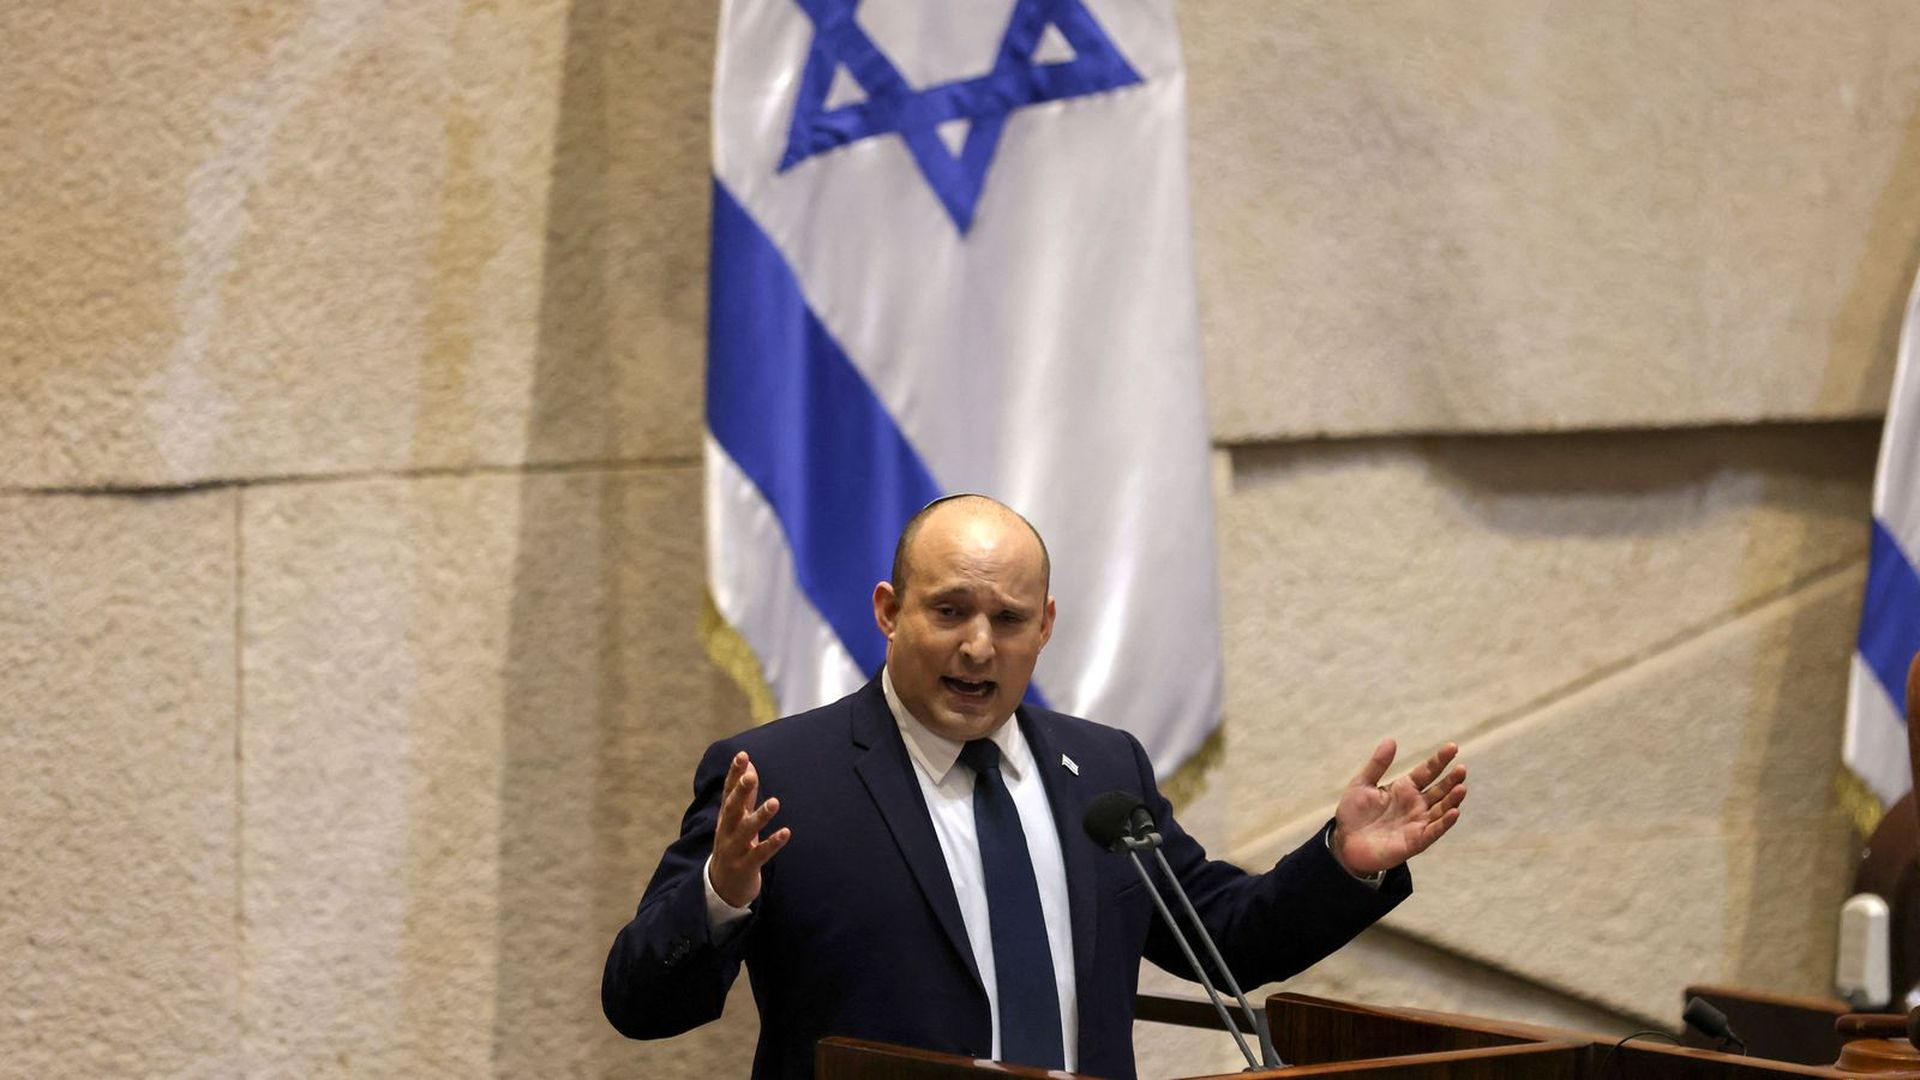 Bennett speaks during a plenum session at the assembly hall in the Knesset in Jerusalem on Nov. 3, 2021. Photo: Ahmad Gharabli/AFP via Getty Images